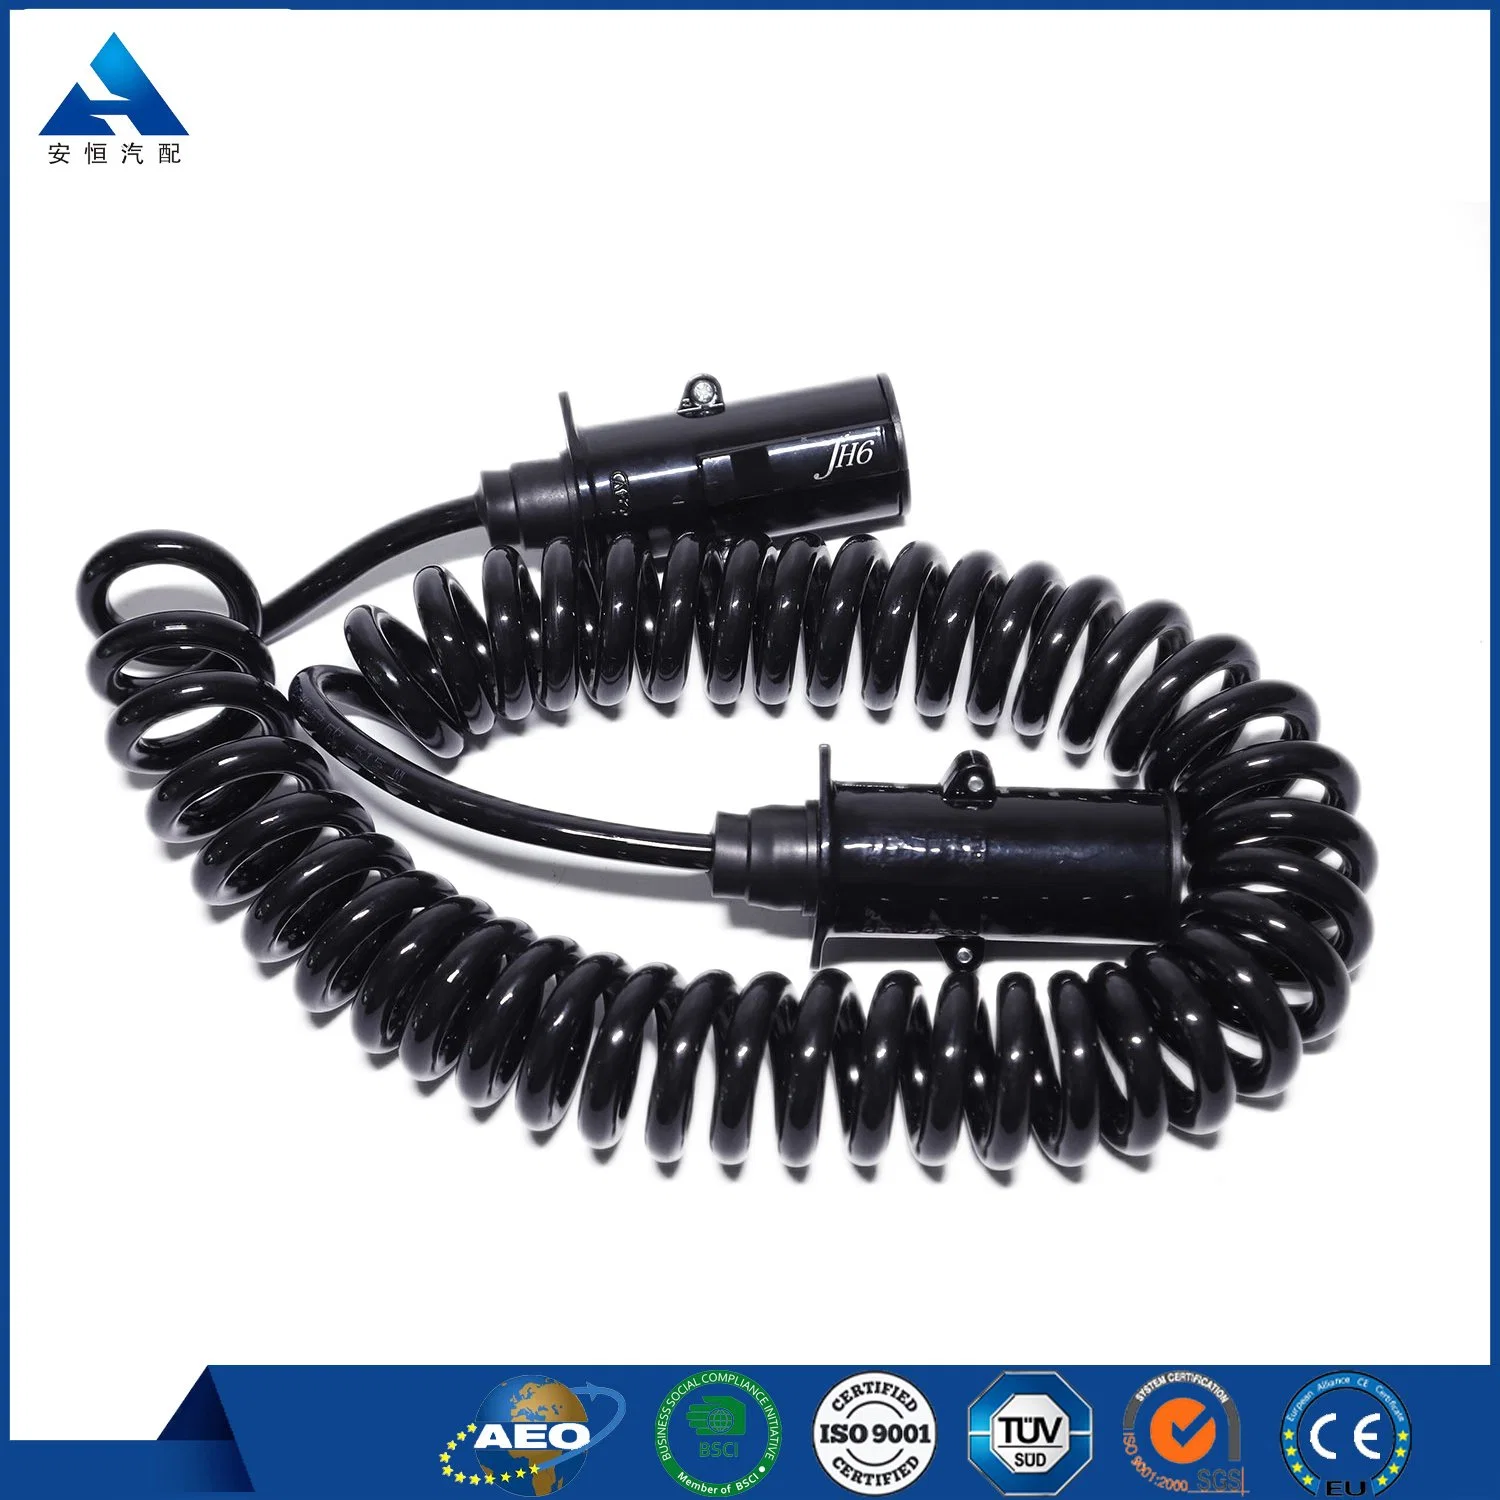 Brake System Electrical Extension Seven High Pressure Nylon Tubing Core Coiled Spiral Cable 7 Way Coiled Trailer Cable Hot of Sale